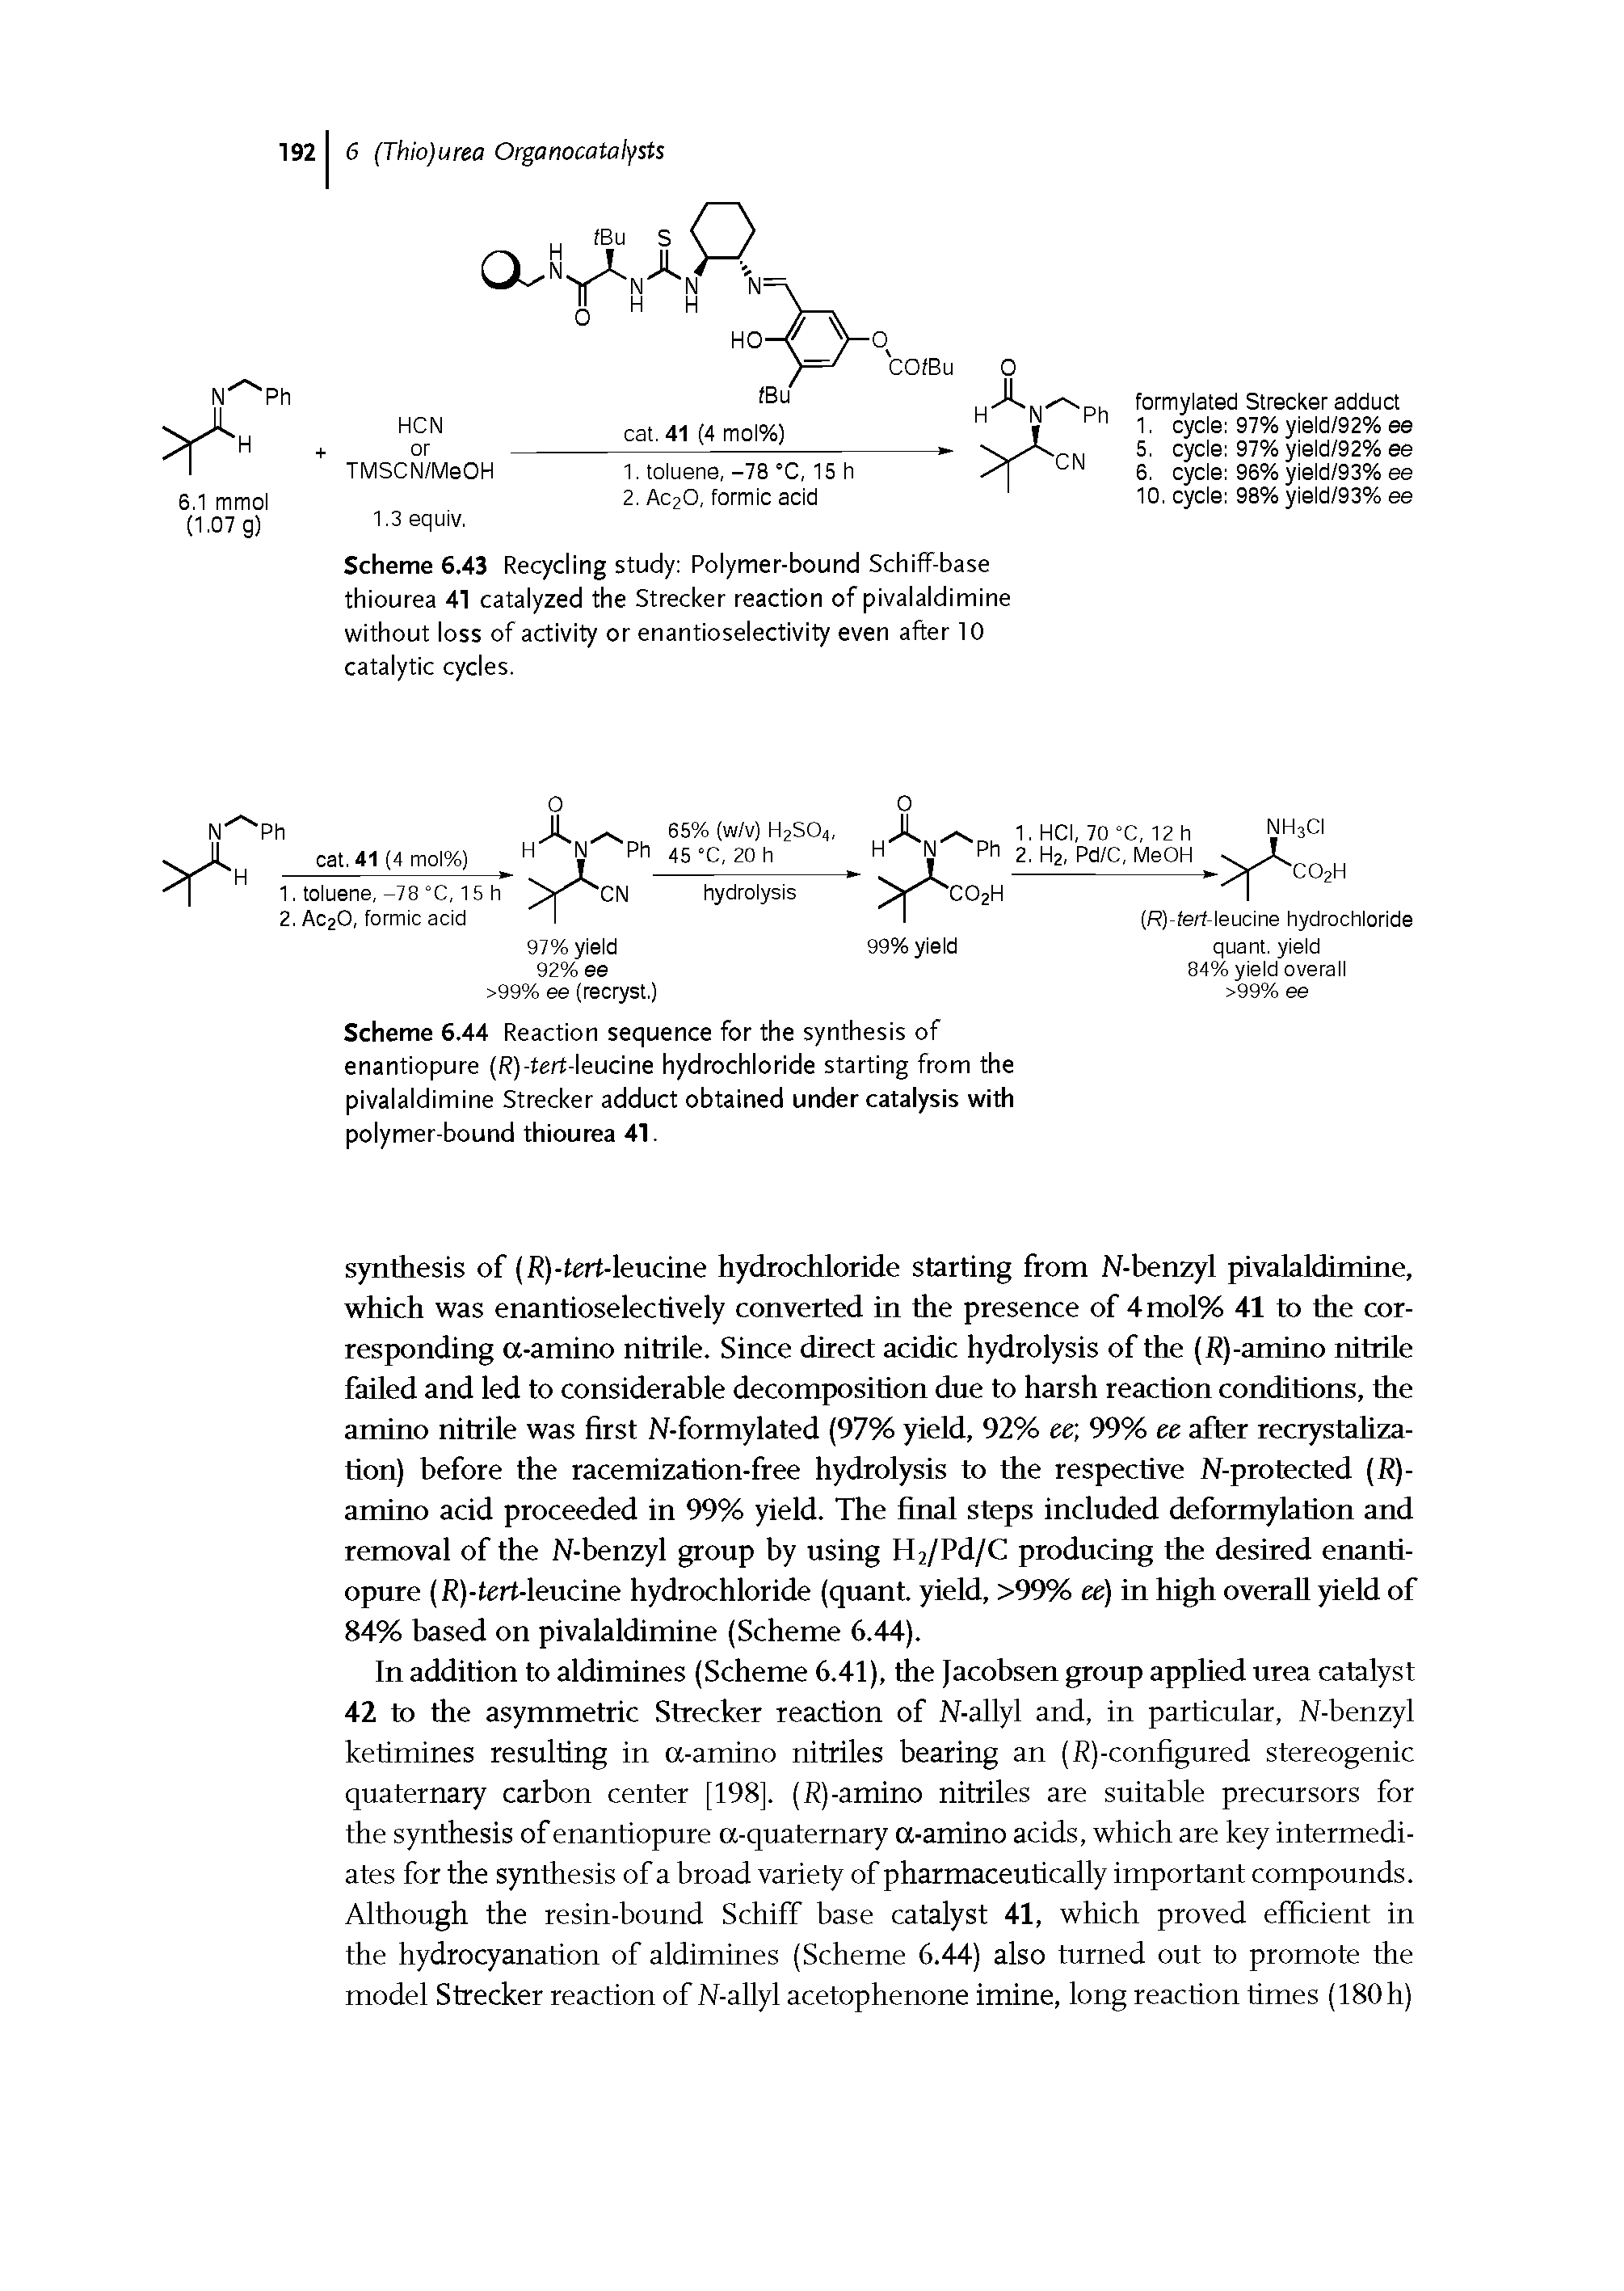 Scheme 6.44 Reaction sequence for the synthesis of enantiopure (/ )-tert-leucine hydrochloride starting from the pivalaldimine Strecker adduct obtained under catalysis with polymer-bound thiourea 41.